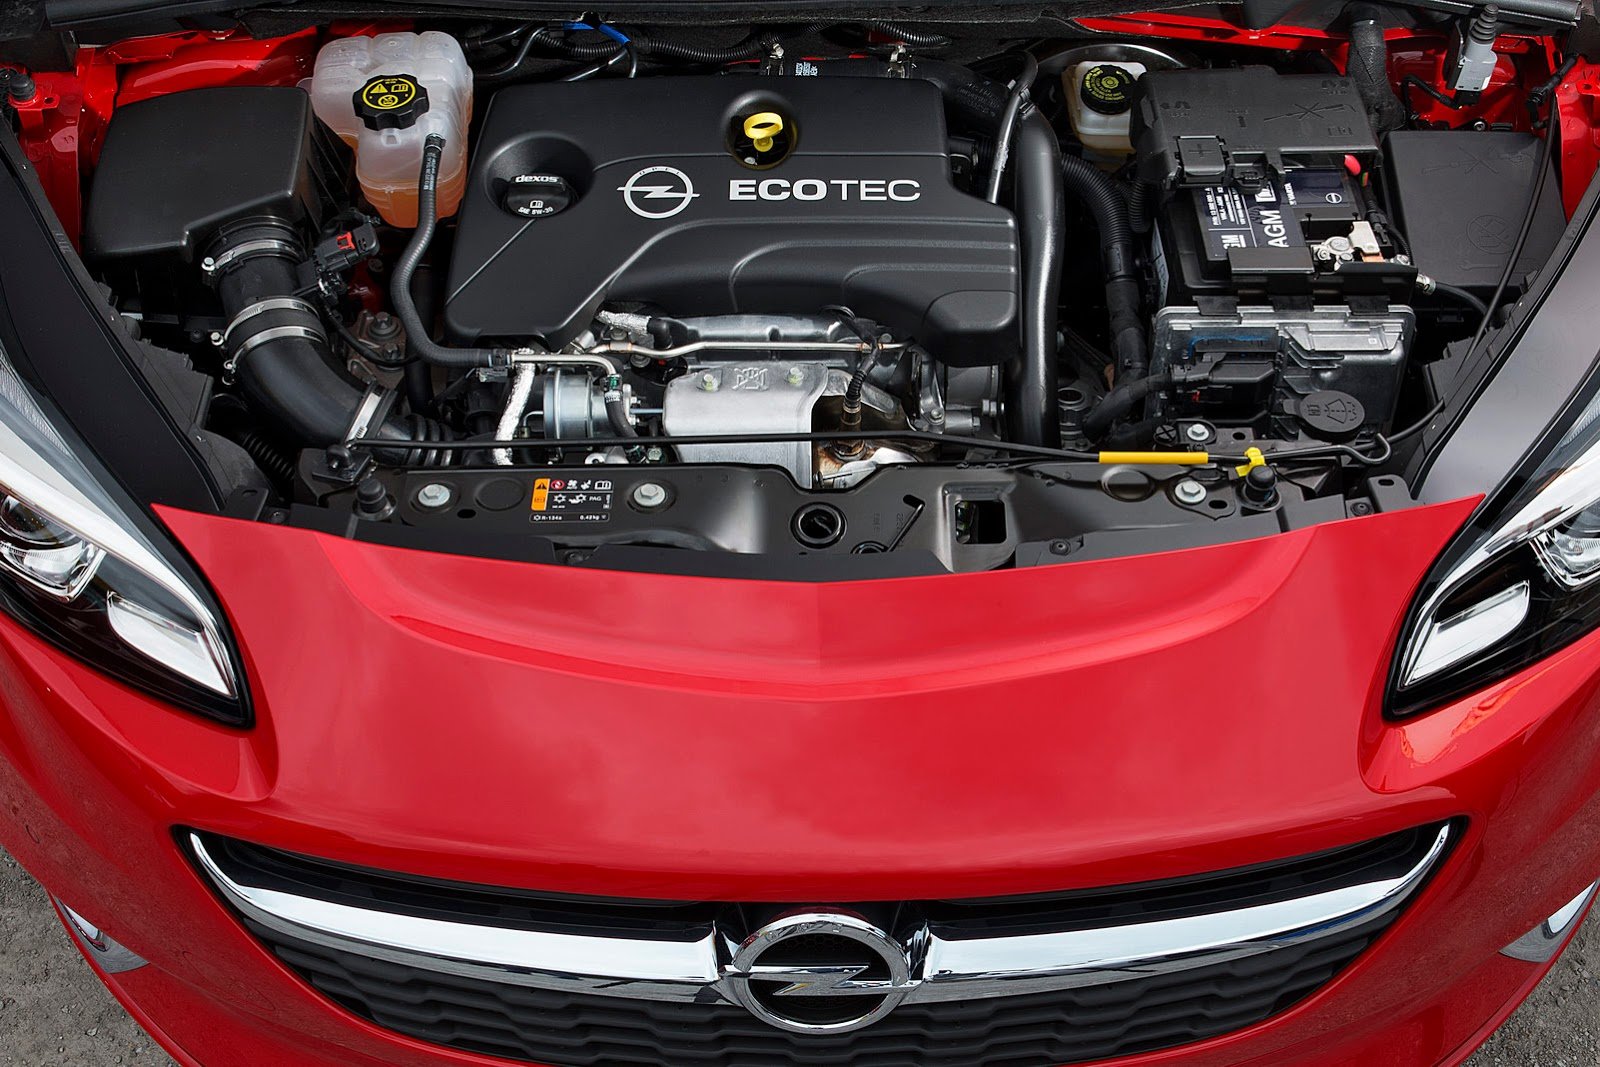 2014, Opel, Corsa, Red, Germany, Cars, Engine Wallpaper